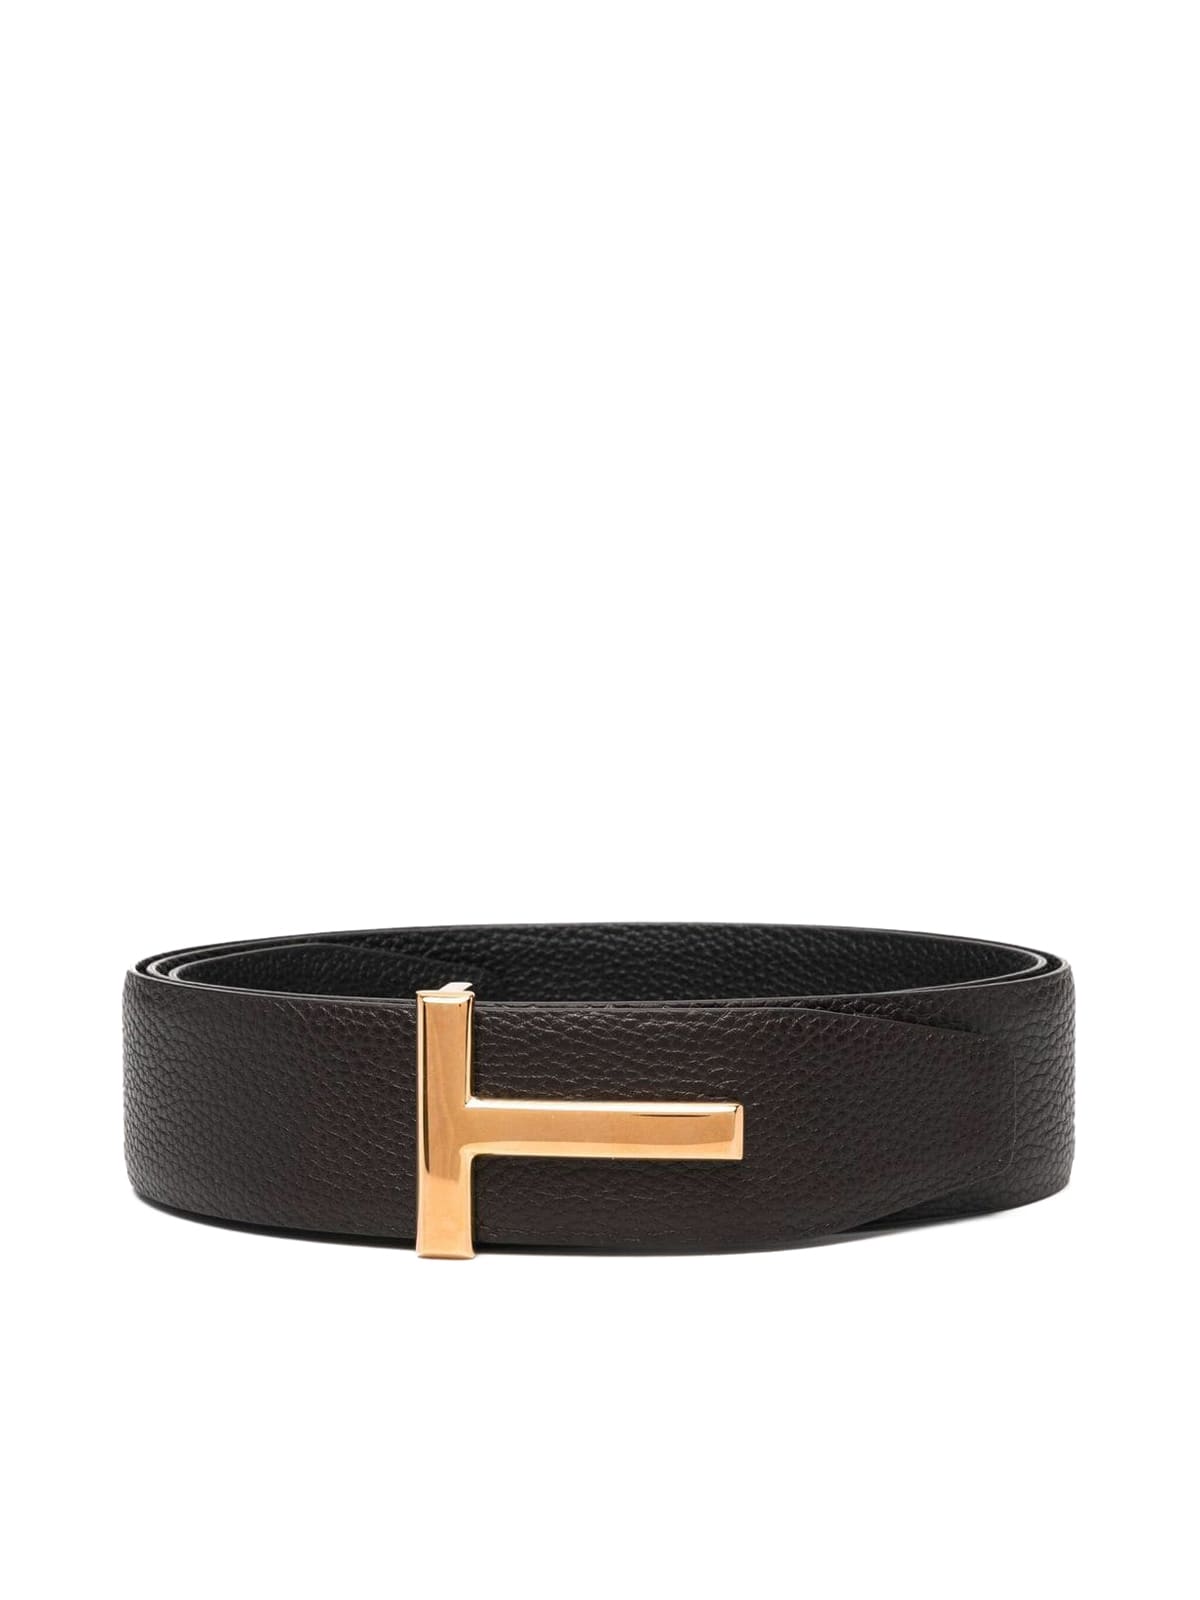 Tom Ford Soft Grain Leather T Beltreversible Ps 40 Mm